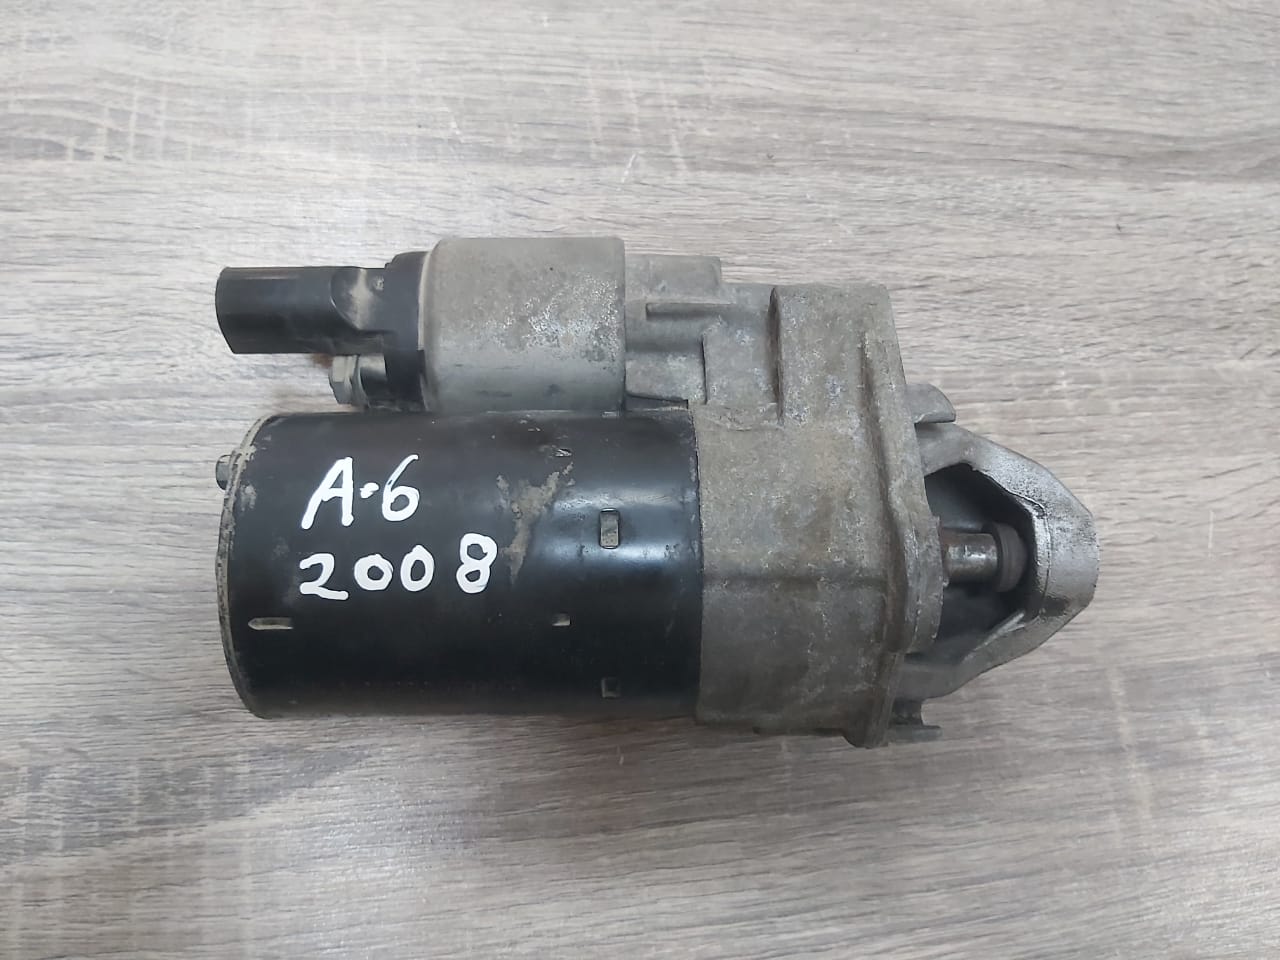 AUDI A6 A4 3.2L ENGINE STARTER 2005 TO 2011 MODEL OEM PART NO 06B 911 023 B ( Genuine Used AUDI Parts )